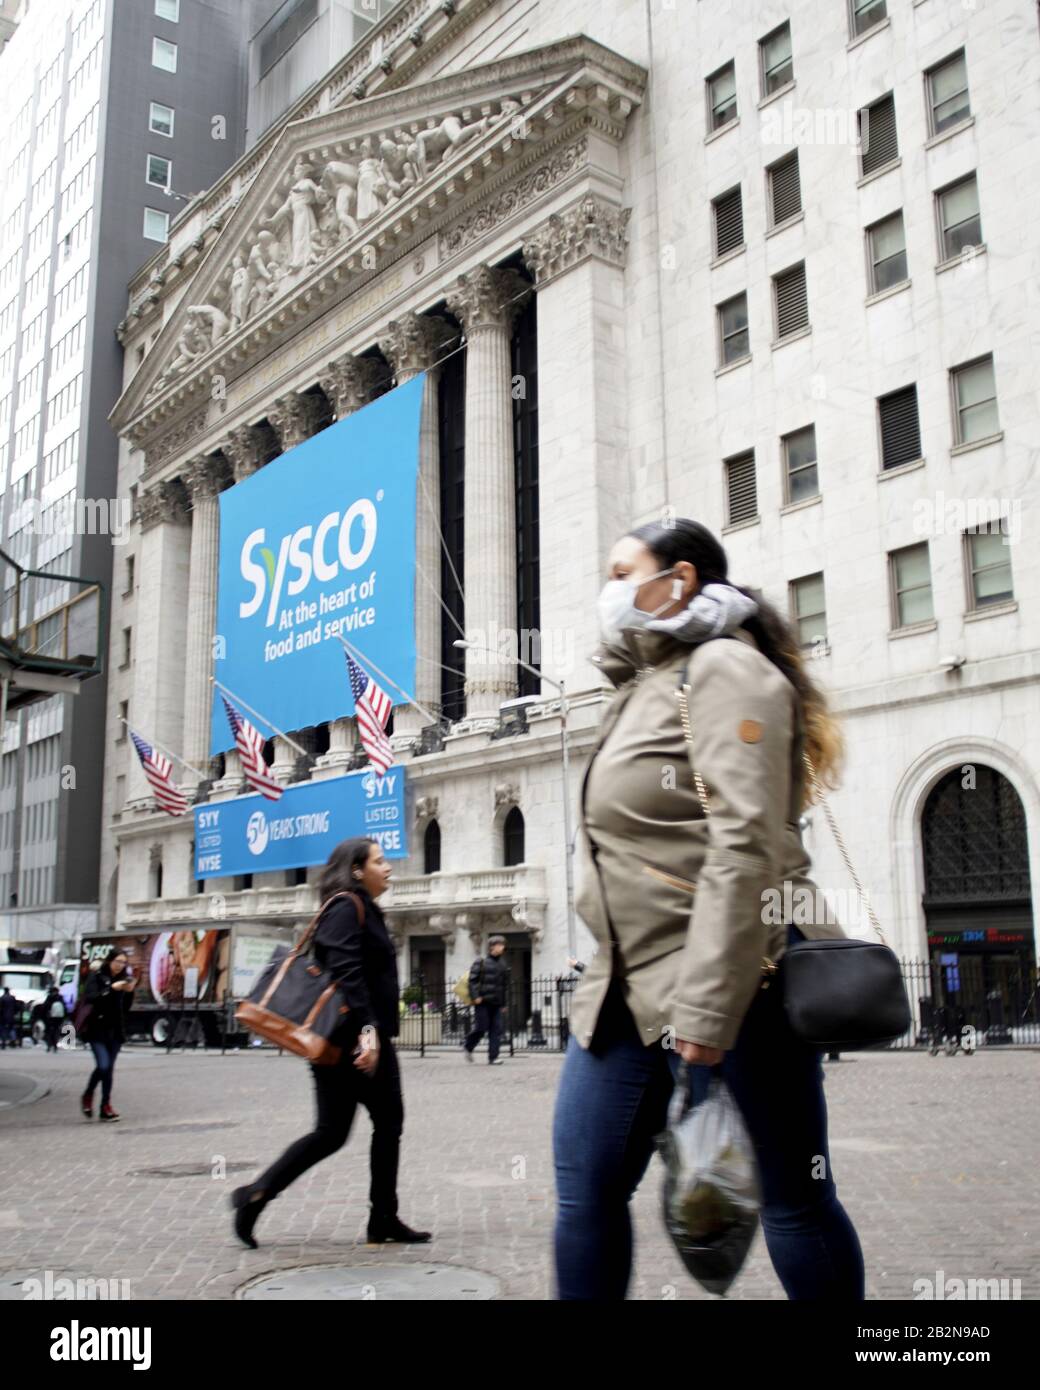 New York, United States. 03rd Mar, 2020. A woman walks past the New York Stock Exchange wearing a face mask on Wall Street in New York City on Tuesday, March 3, 2020. The Fed cut rates by half a percentage point Tuesday to combat coronavirus slowdown. The number of coronavirus cases and deaths continues to climb in the U.S. Photo by John Angelillo/UPI Credit: UPI/Alamy Live News Stock Photo